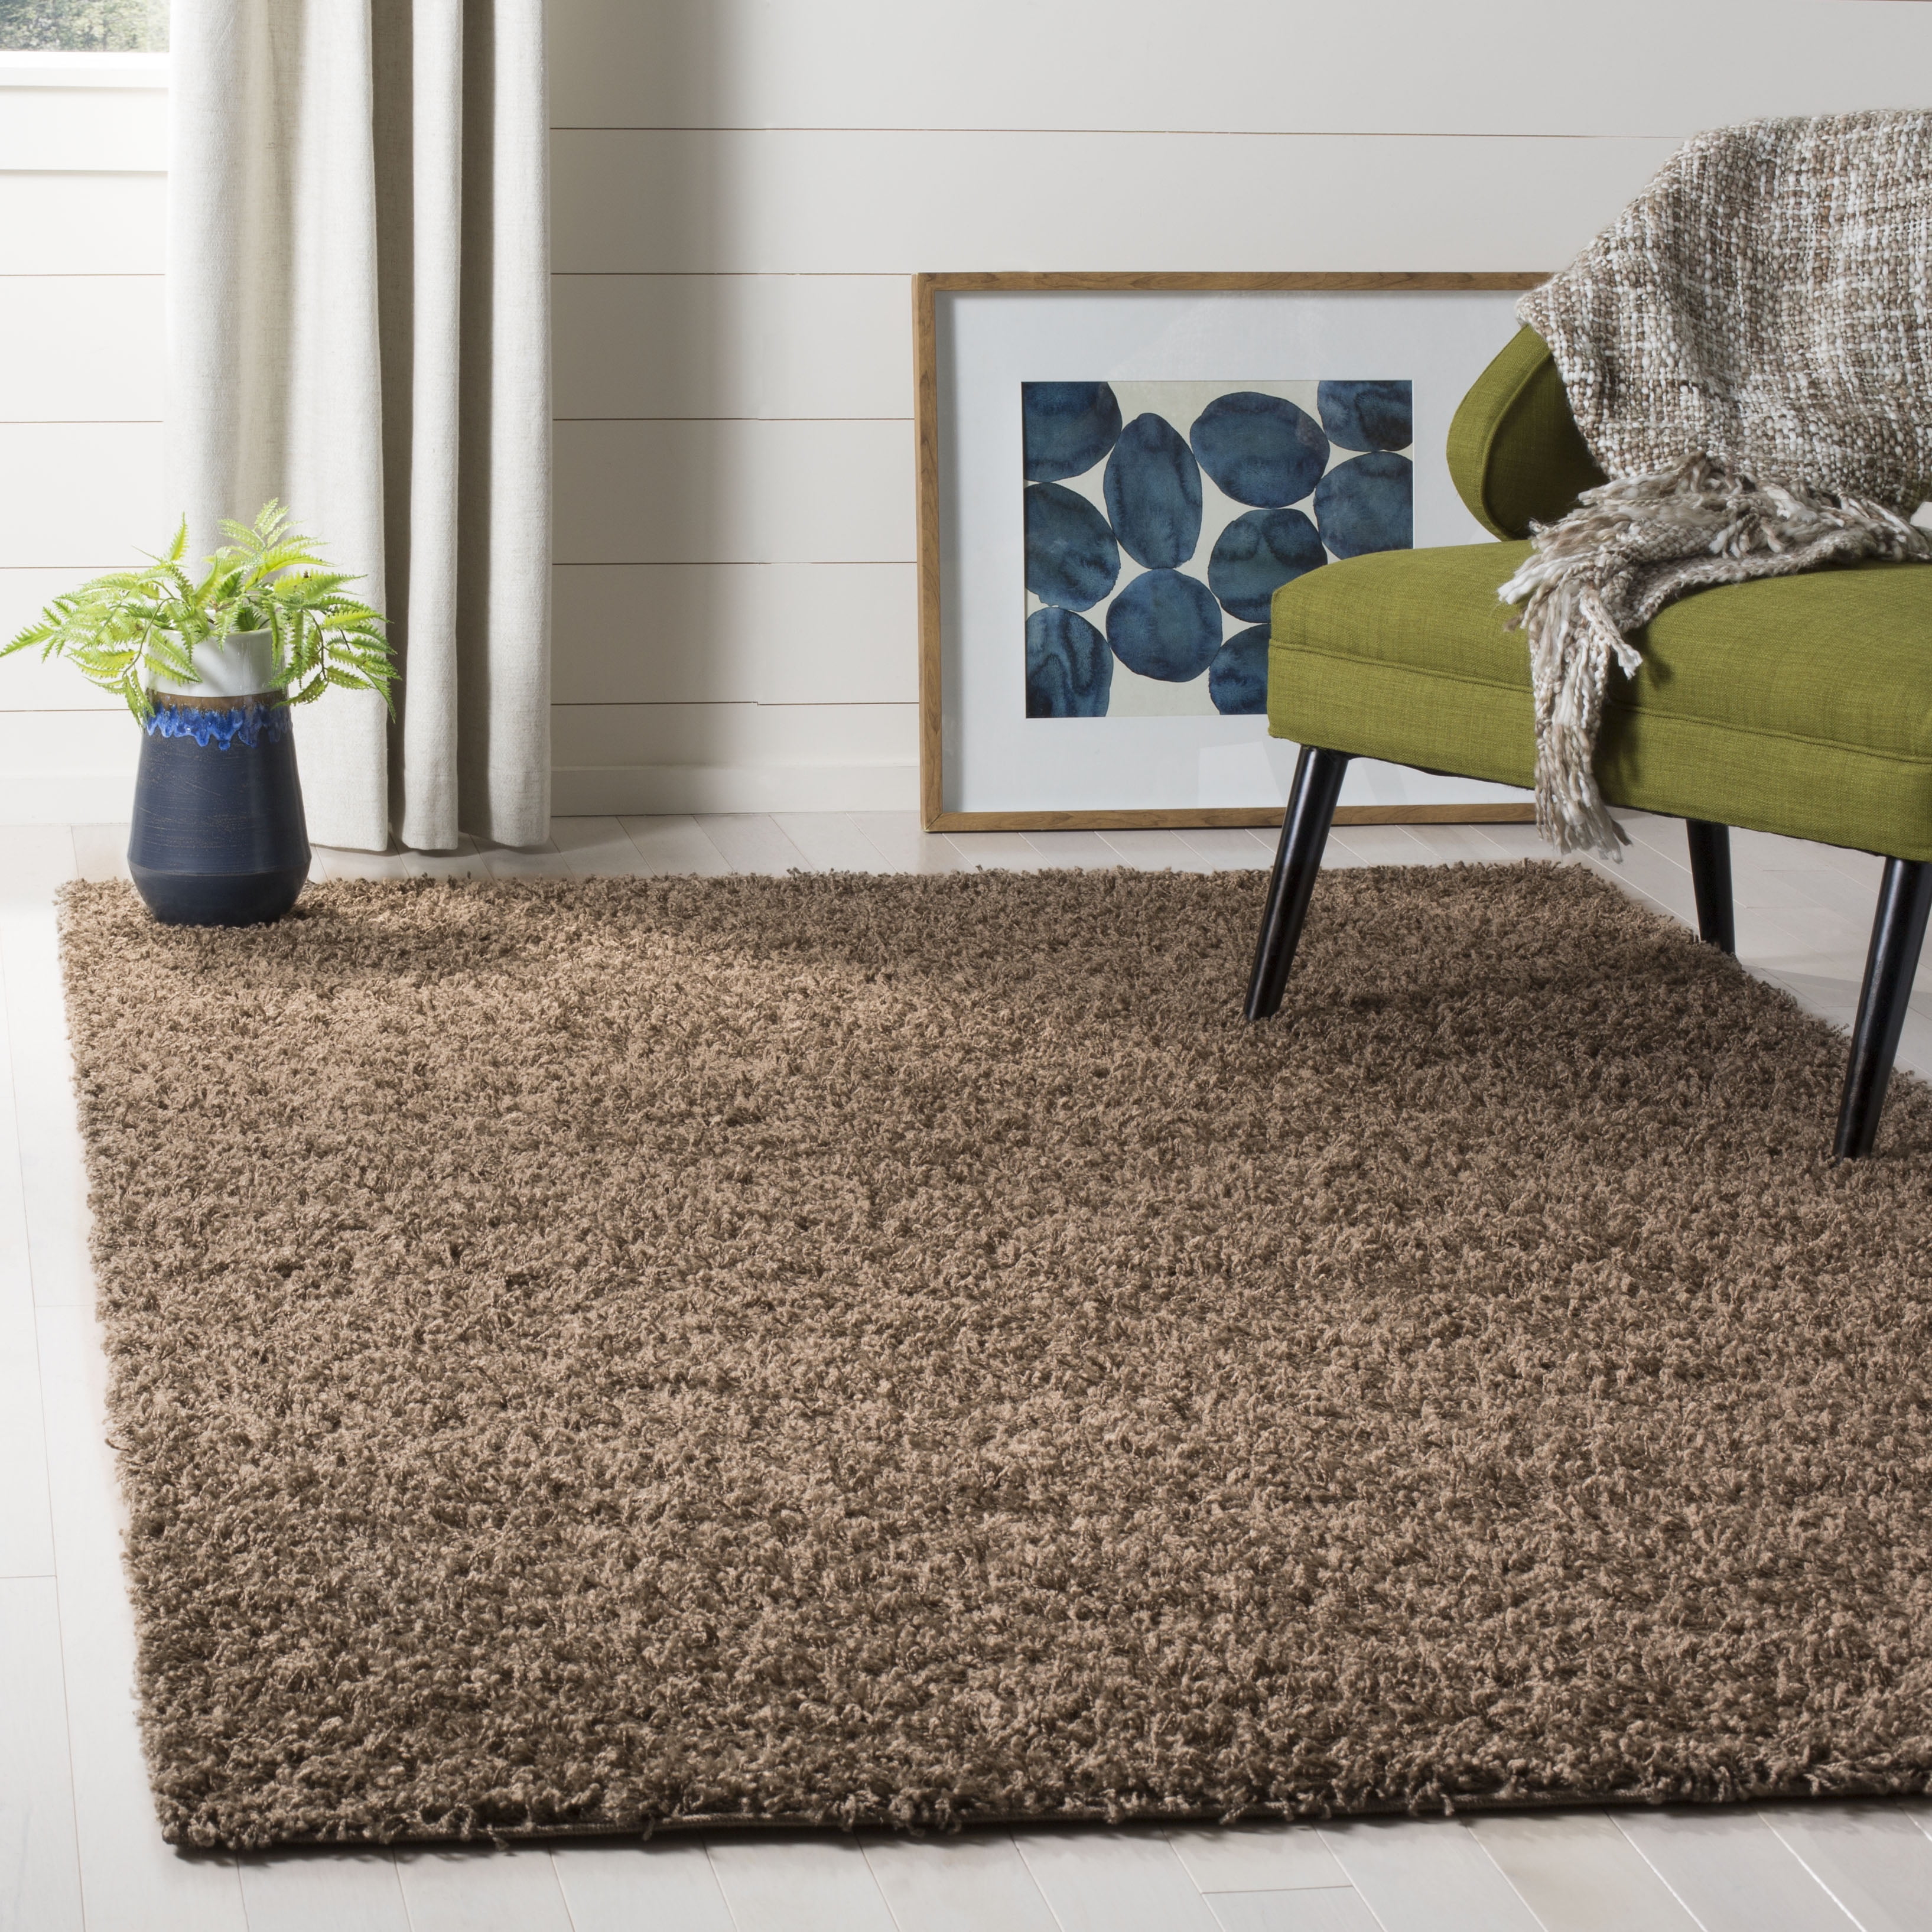 Rugs Taupe Beige-Brown 3x5 Area Shag Rug Solid Shaggy Carpet Actual 3'3" x 4'3" 